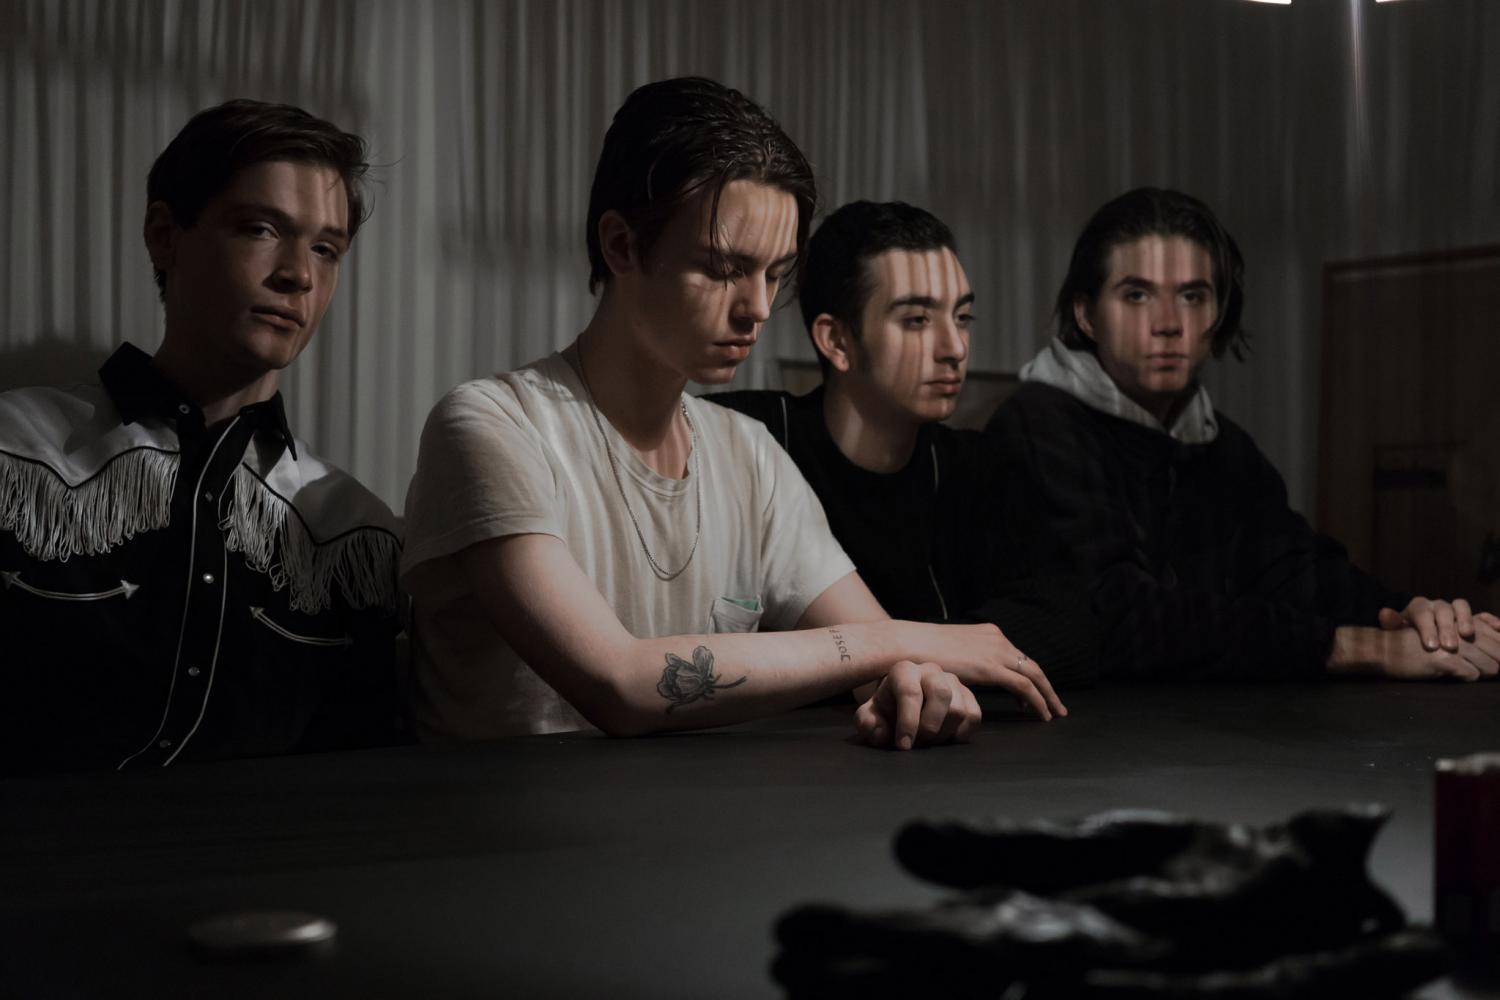 Iceage Album Review: "Plowing Into the Field of Love"